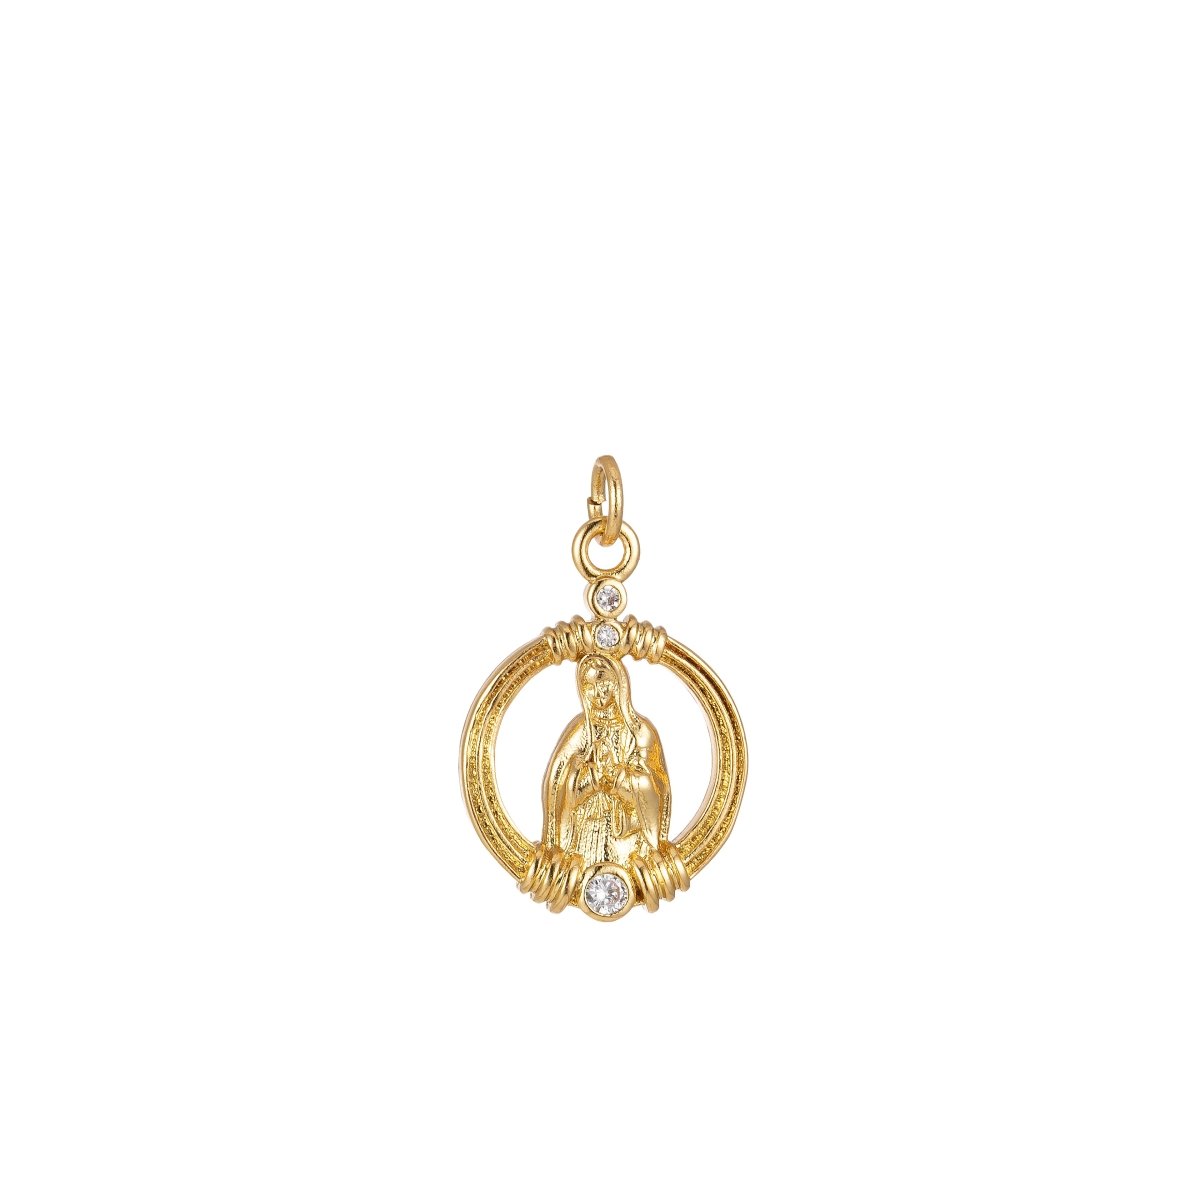 Dainty Gold Elegant Simple Religious Mother Mary Charm Pendant for Religious Jewelry Making E-900 - DLUXCA